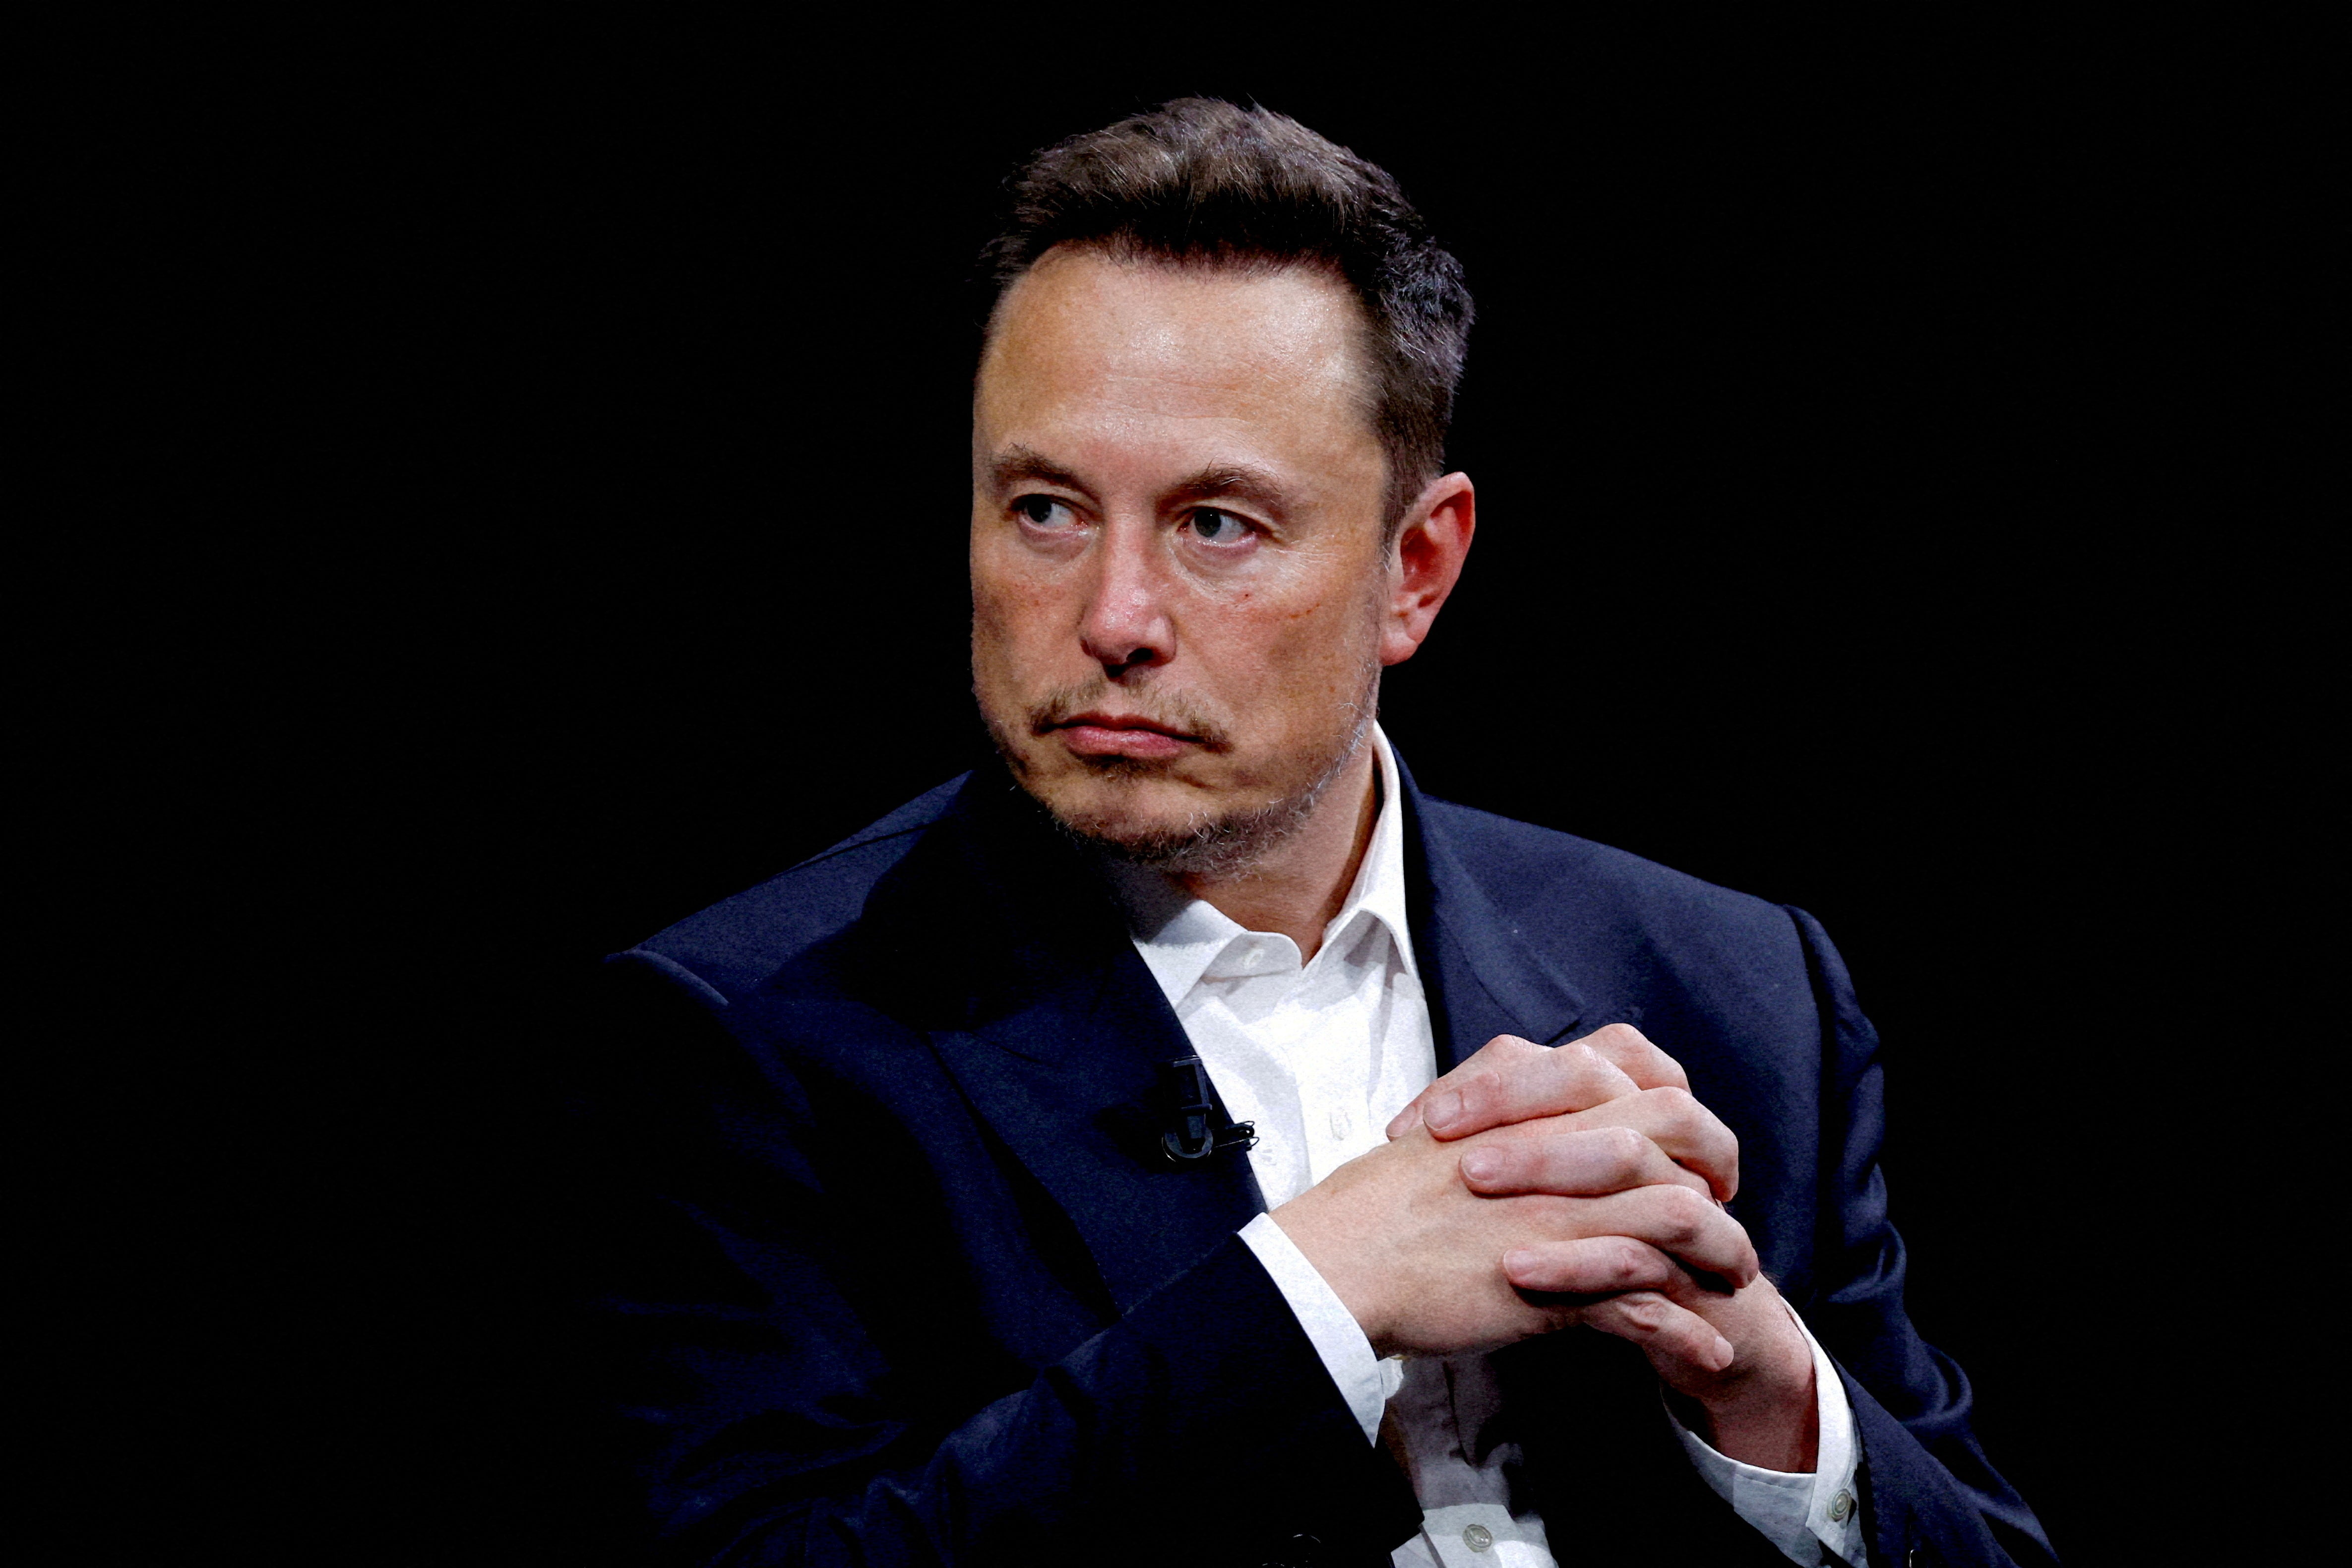 Elon Musk, the chief executive of Tesla and SpaceX, came second on the Forbes’ list with an estimated 195 billion dollars (£155 billion)